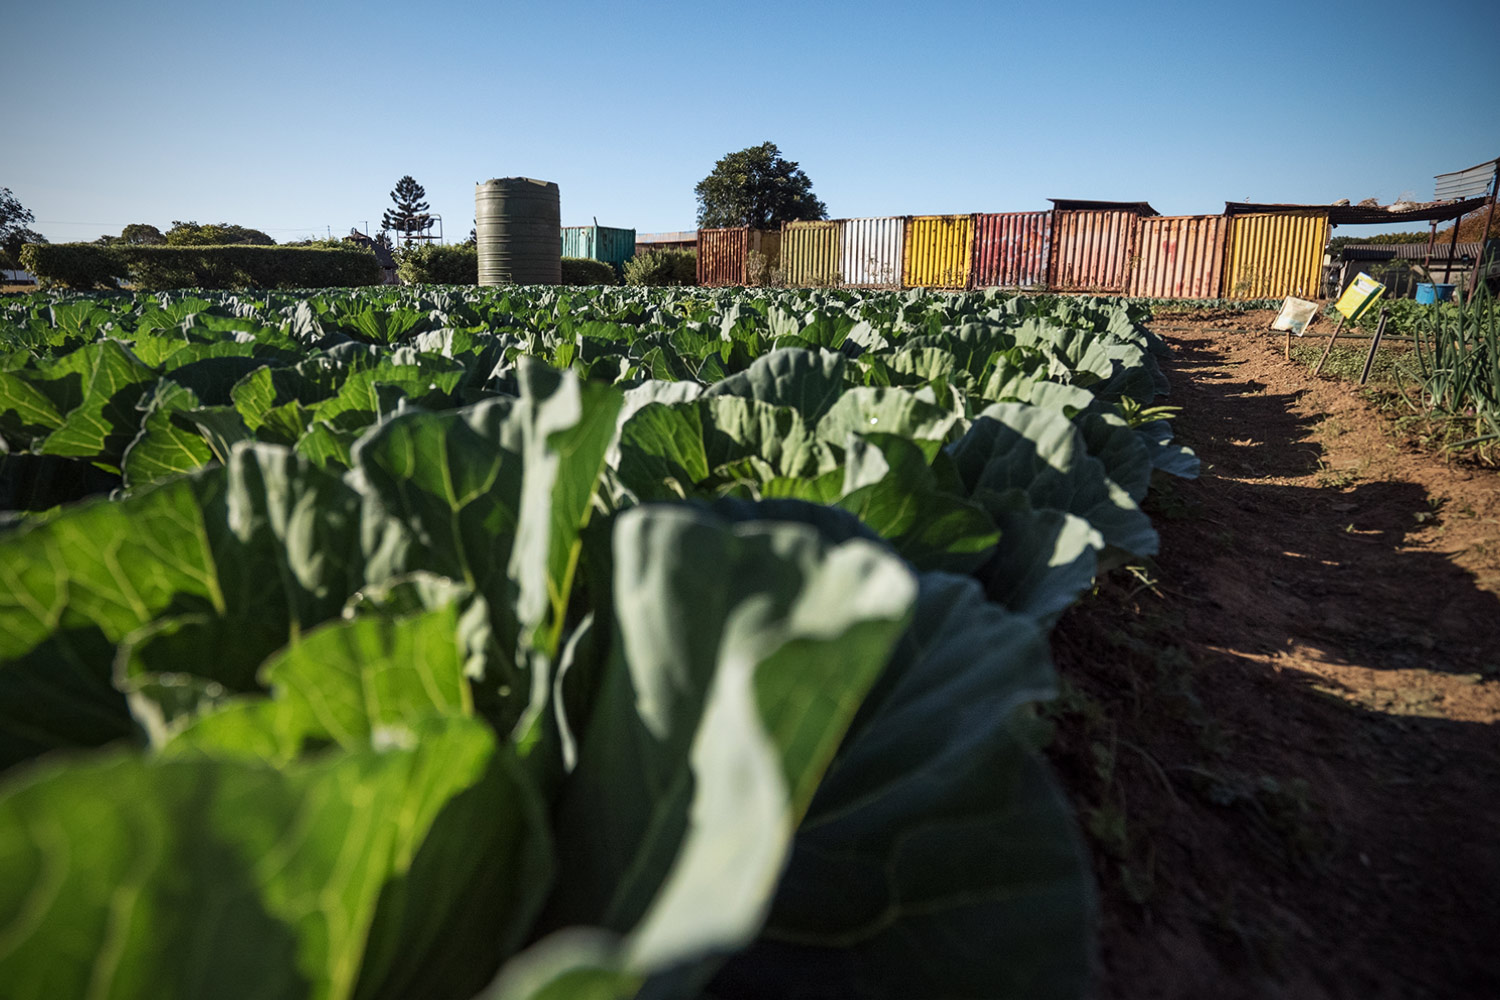 Small cabbage plantation on the outskirts of a settlement in Zambia.